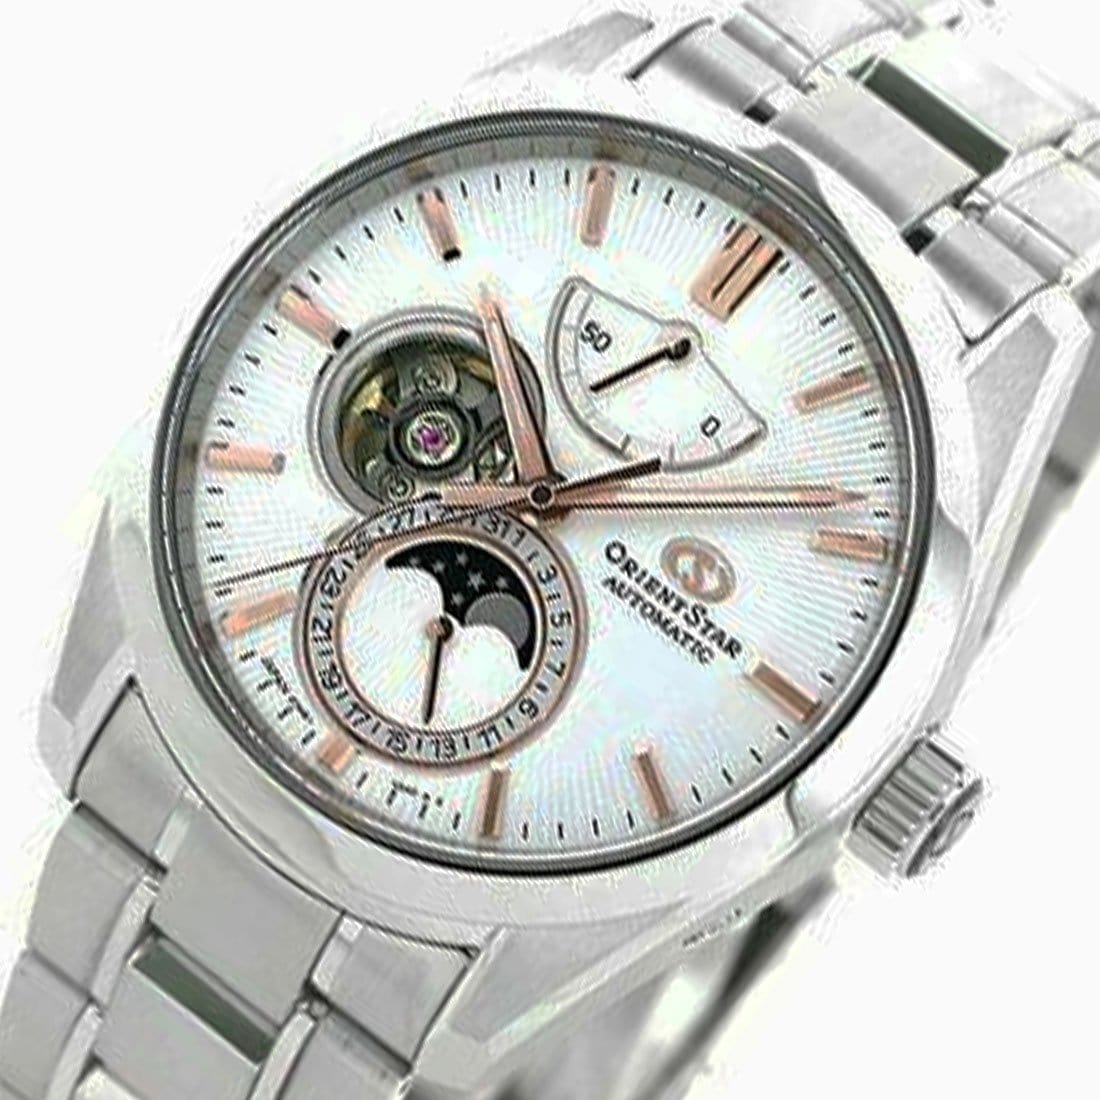 RE-AY0003S00B RE-AY0003S Orient Star Moon Phase Classic Automatic Open Heart Watch